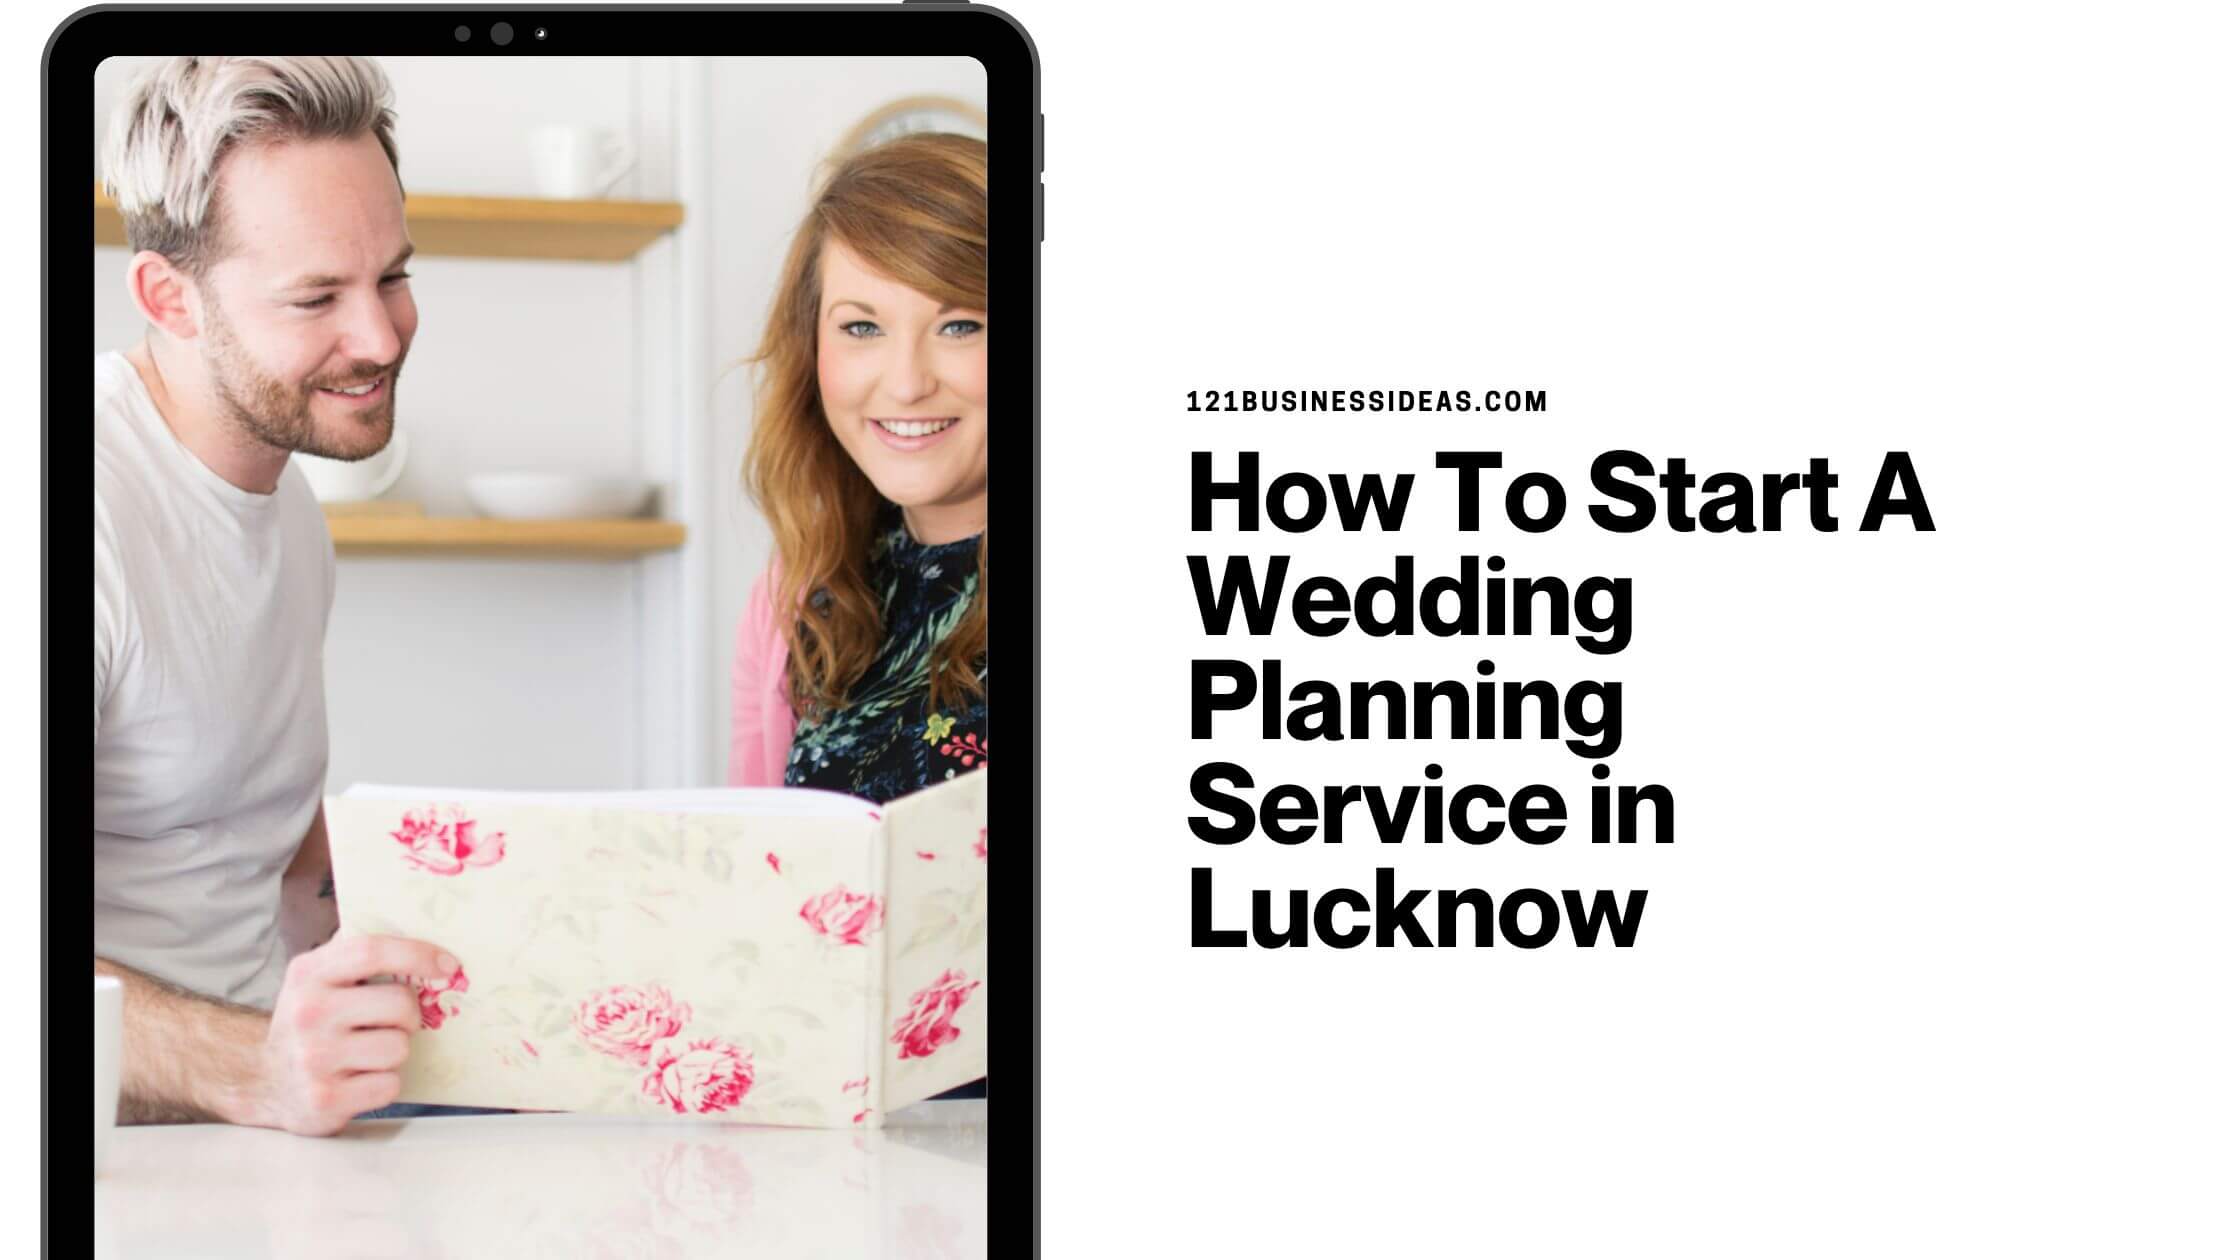 How To Start A Wedding Planning Service in Lucknow (1)